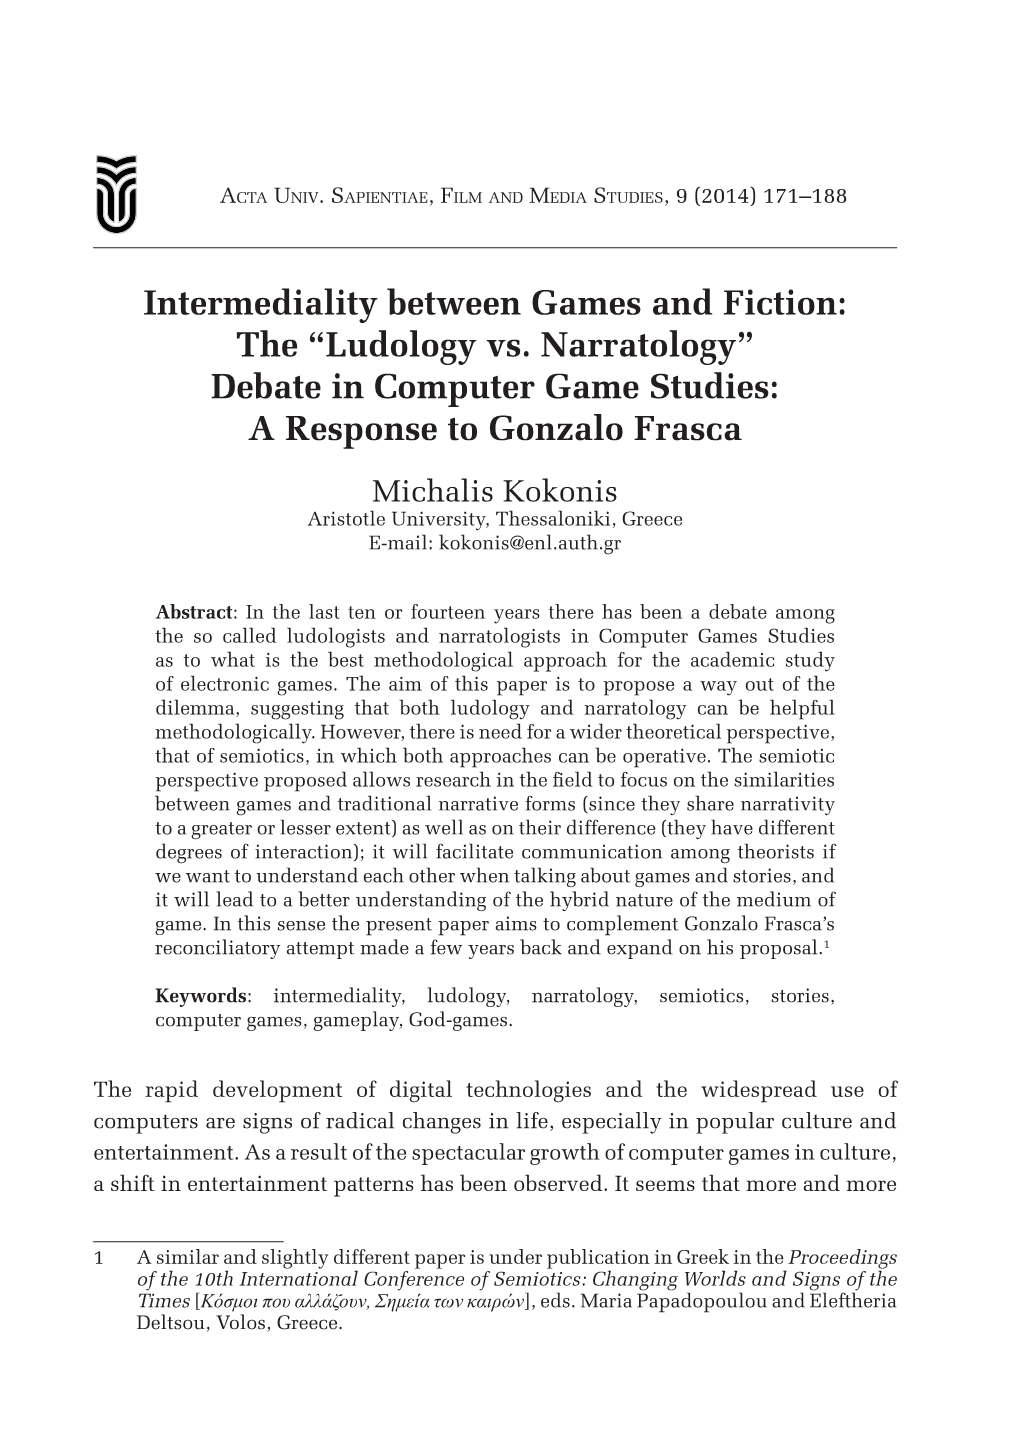 Intermediality Between Games and Fiction: the “Ludology Vs